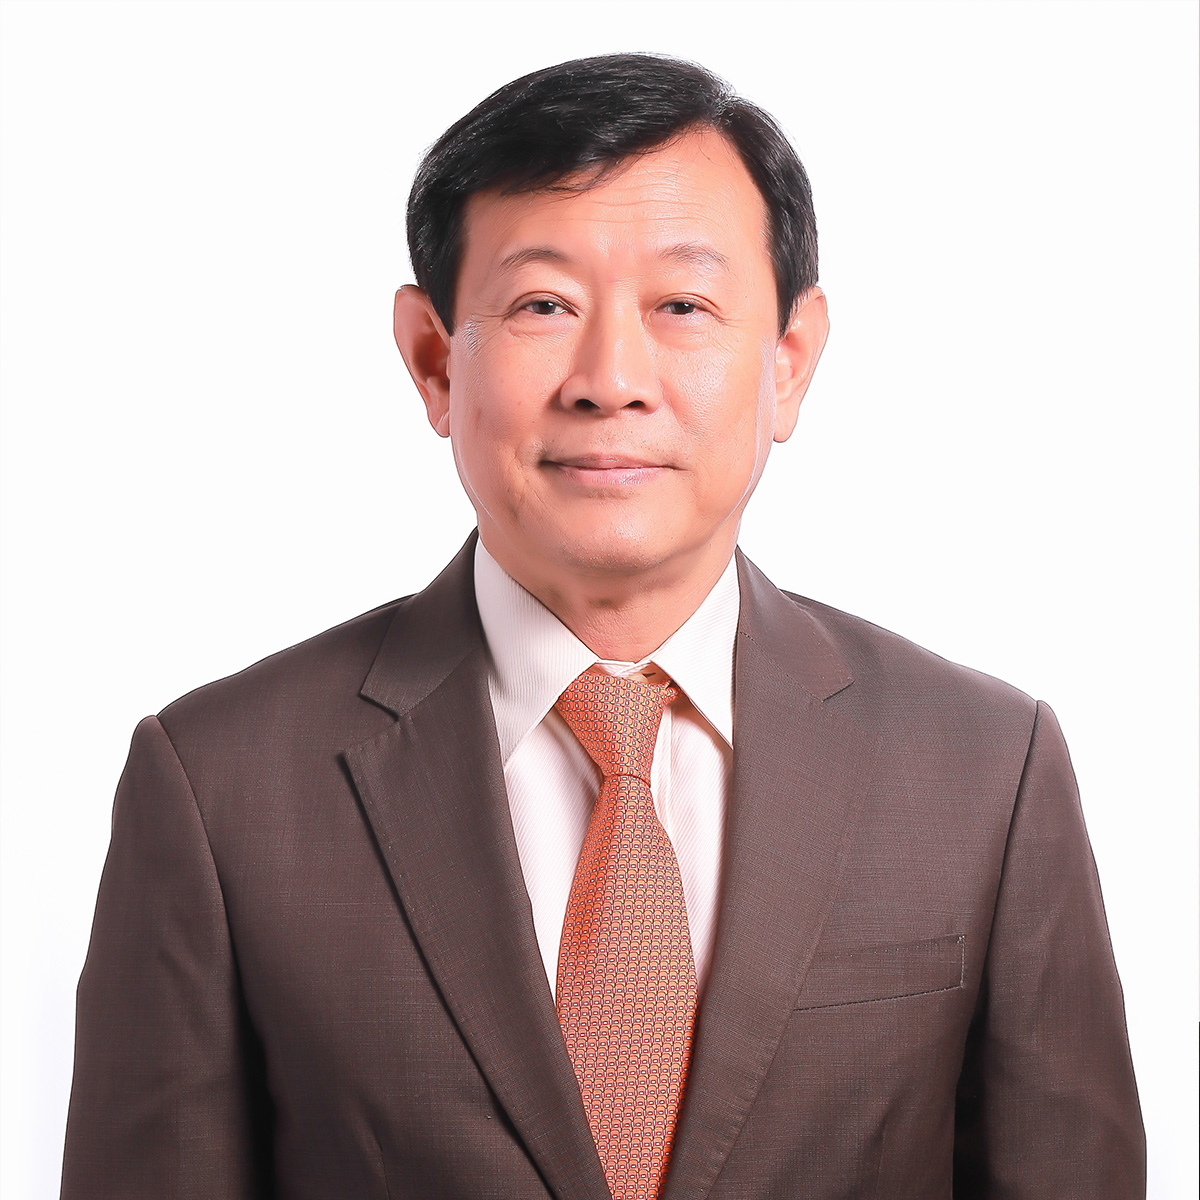 Mr. Noppol Milinthanggoon – Chairman of the board